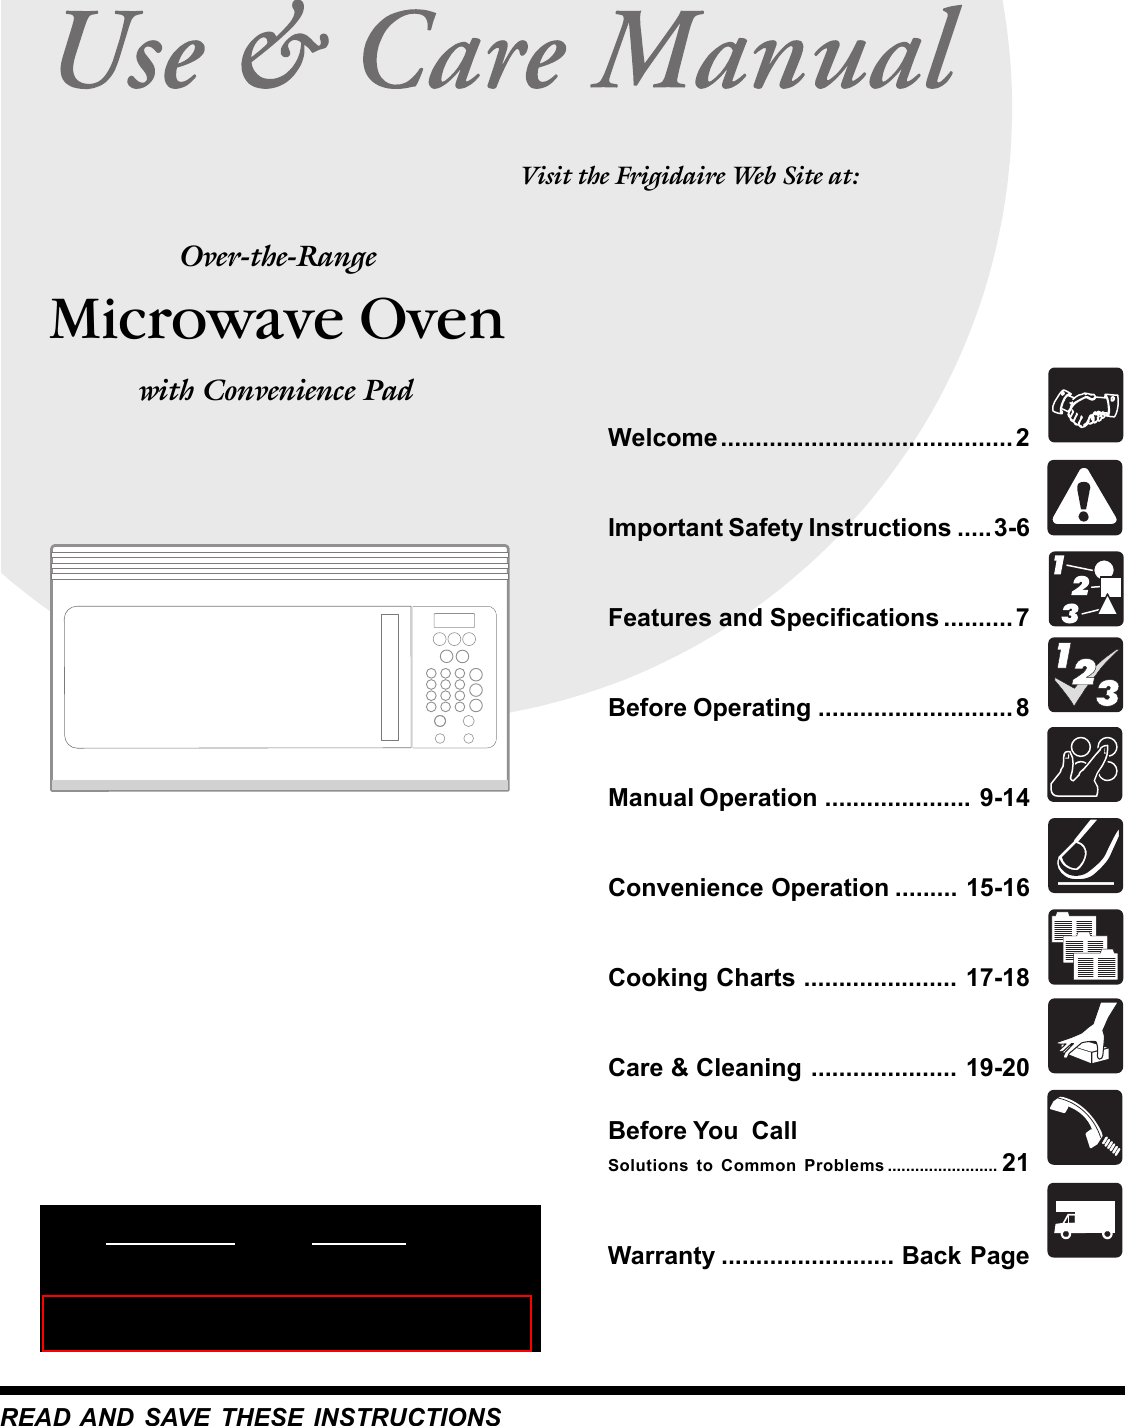  Microwave OvenOver-the-RangeREAD AND SAVE THESE INSTRUCTIONSWelcome .......................................... 2Important Safety Instructions .....3-6Features and Specifications .......... 7Before Operating ............................ 8Manual Operation ..................... 9-14Convenience Operation ......... 15-16Cooking Charts ...................... 17-18Care &amp; Cleaning ..................... 19-20Before You  CallSolutions to Common Problems ........................ 21Warranty ......................... Back PageVisit the Frigidaire Web Site at: with Convenience Pad